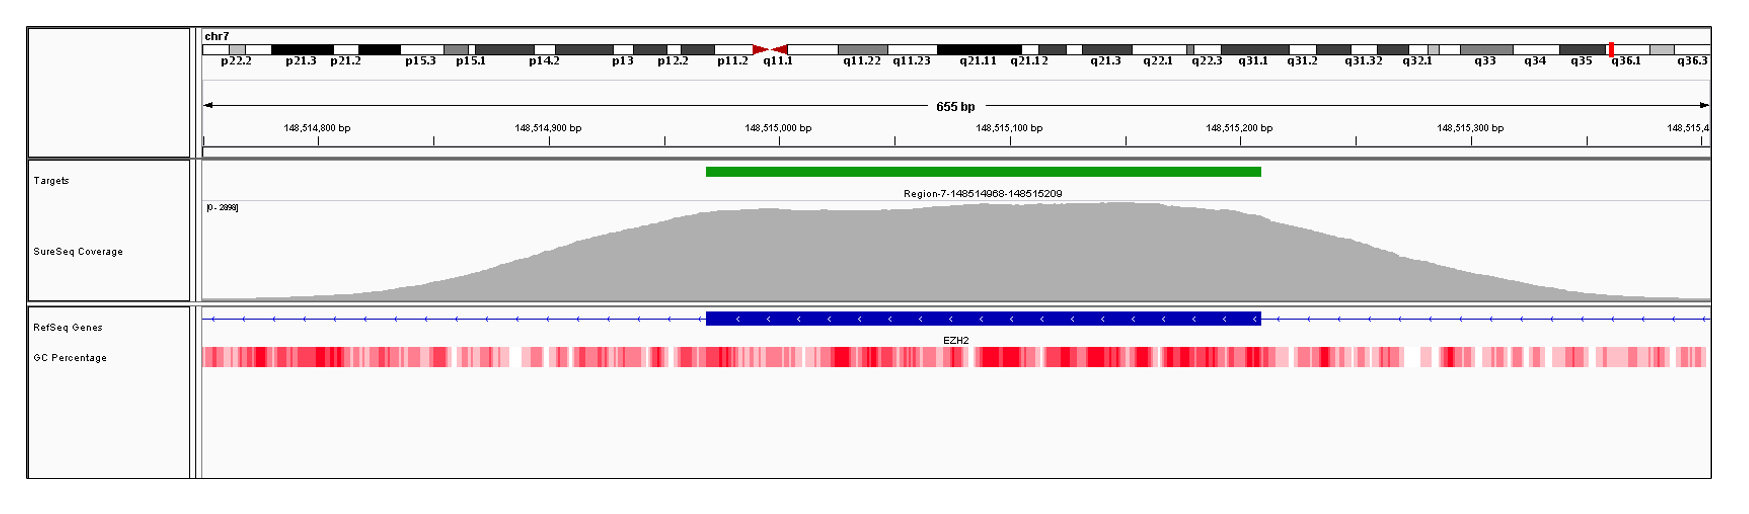 EZH2 Exon 10 (hg19 chr7:148514969-148515209). Depth of coverage per base (grey). Targeted region (green). Gene coding region as defined by RefSeq (blue). GC percentage (red). Image